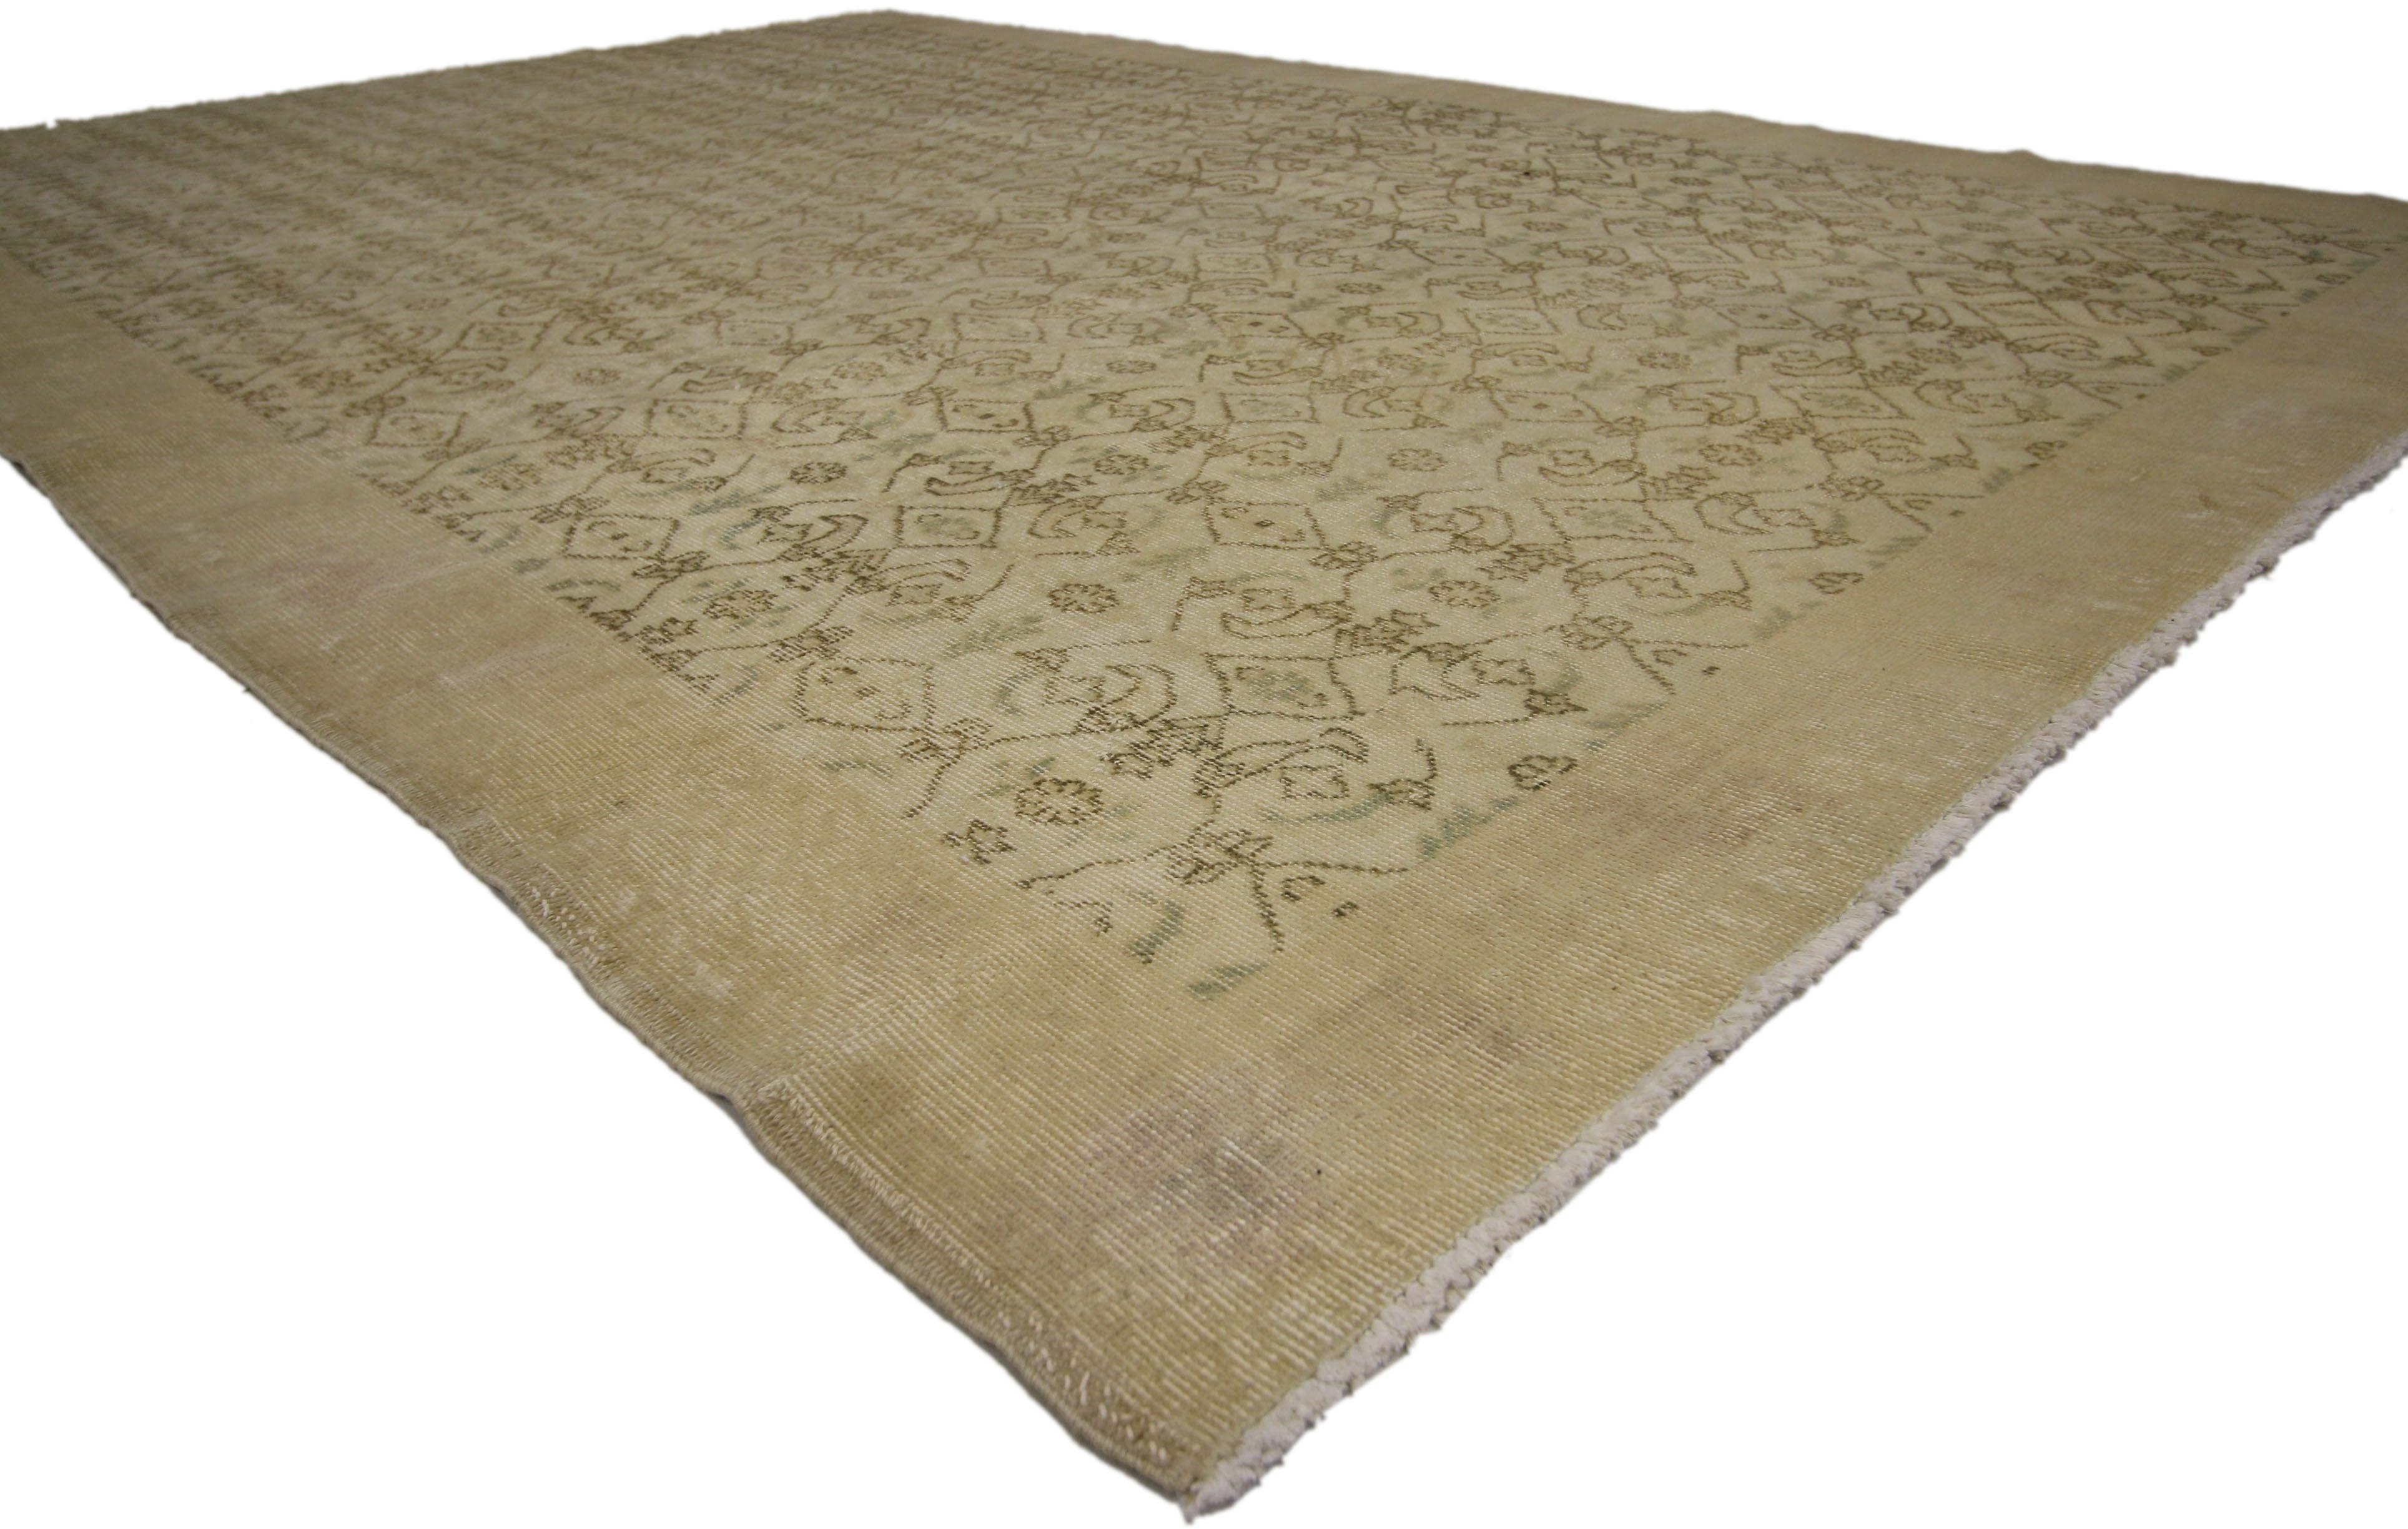 51153 Zeki Muren Distressed Vintage Turkish Sivas Rug with Shabby Chic Cottage Style. Lovingly timeworn with cottage charm and Gustavian grace, this hand knotted wool distressed Turkish Sivas rug beautifully embodies a Shabby Chic Farmhouse style.